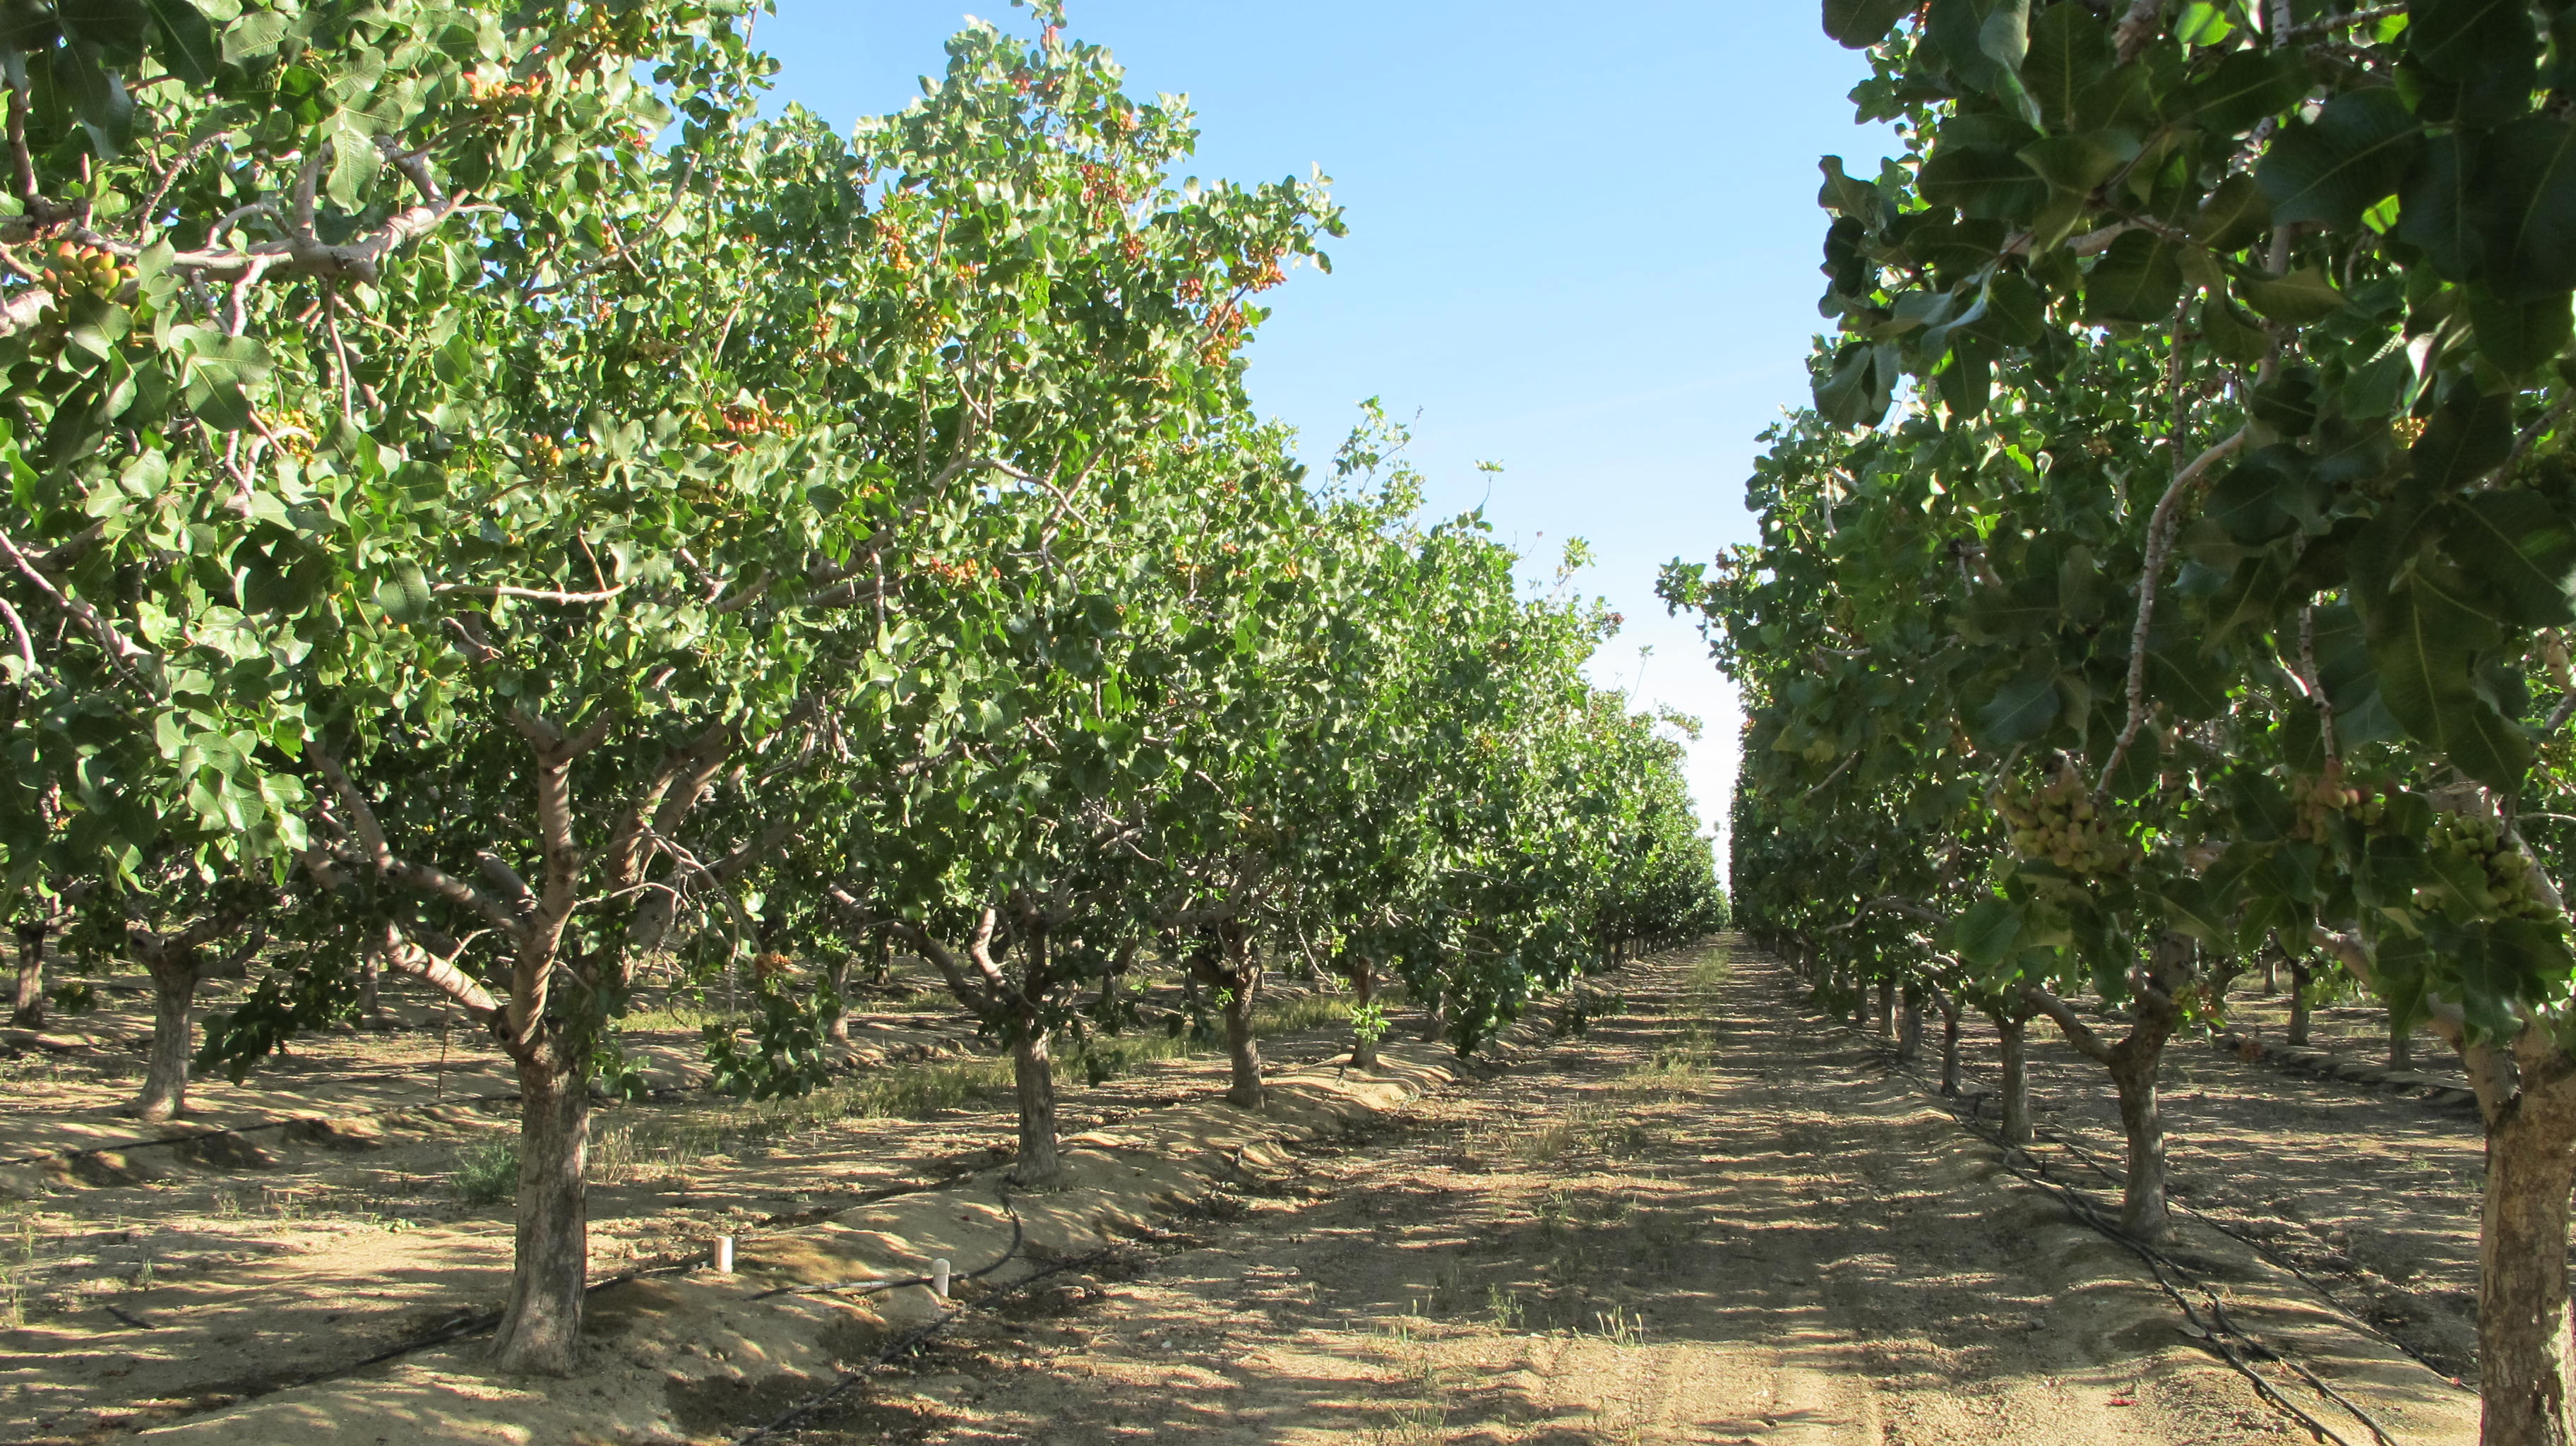 Row of pistachio trees in orchard.